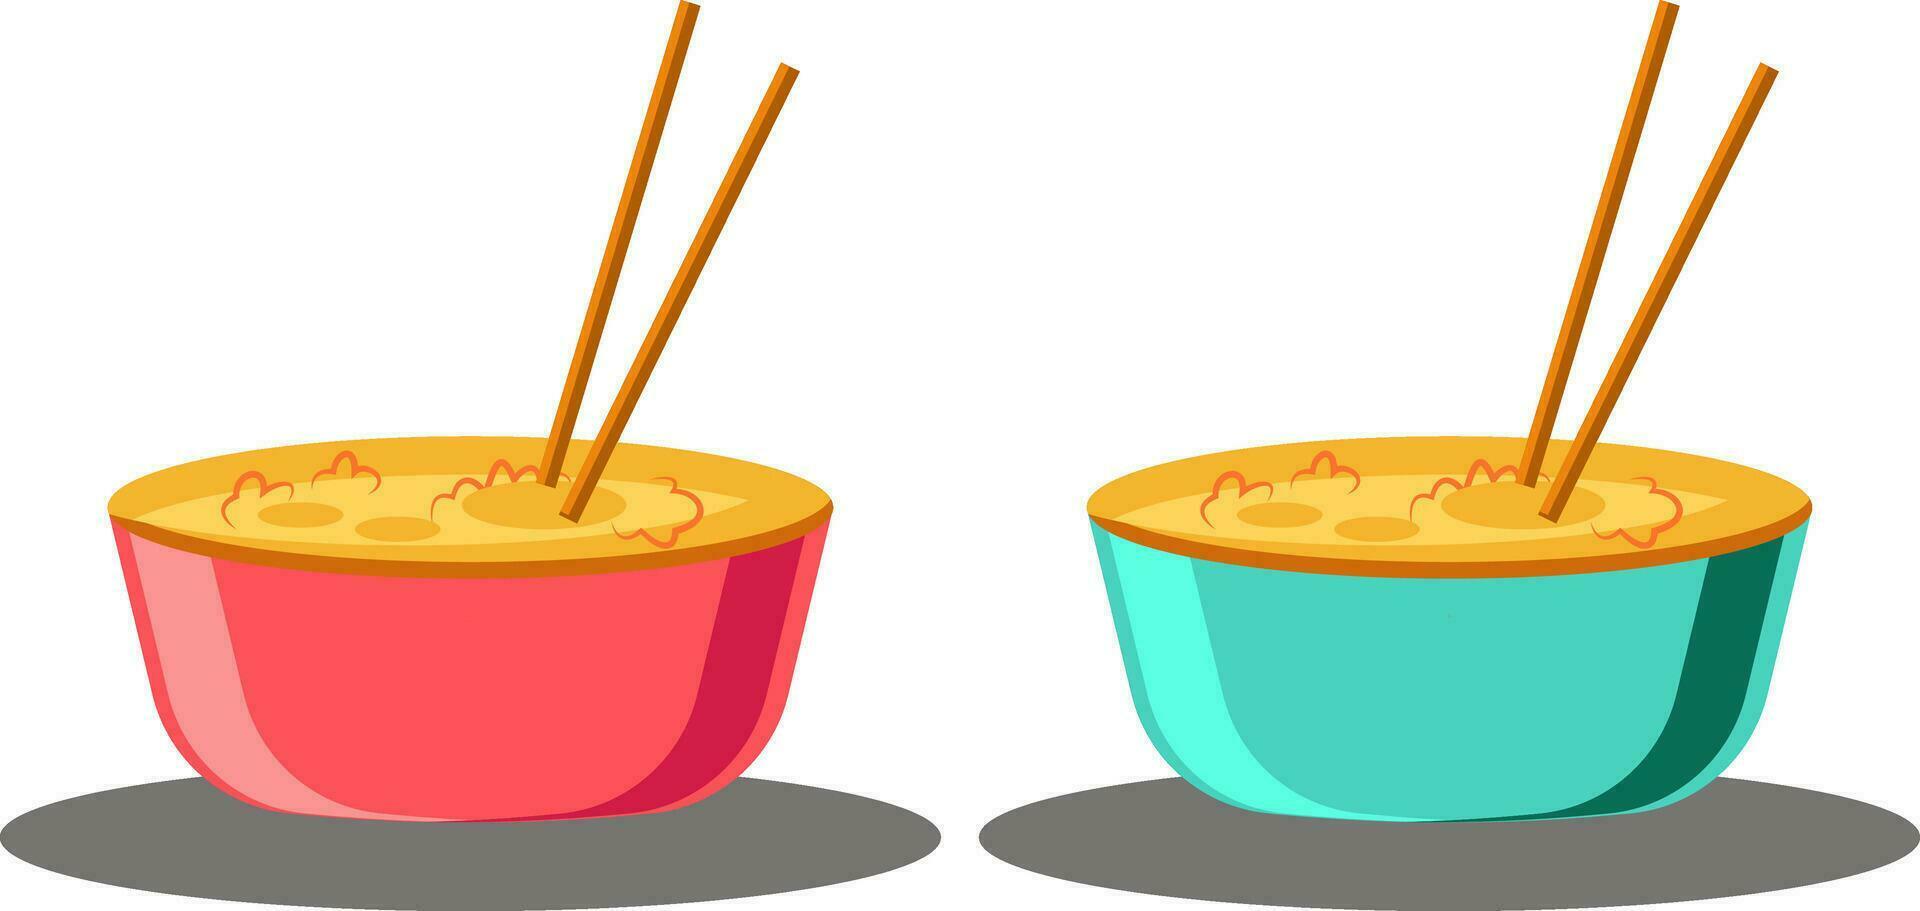 Two bowls full of food ready for Chinese New Year vector illustration on white background